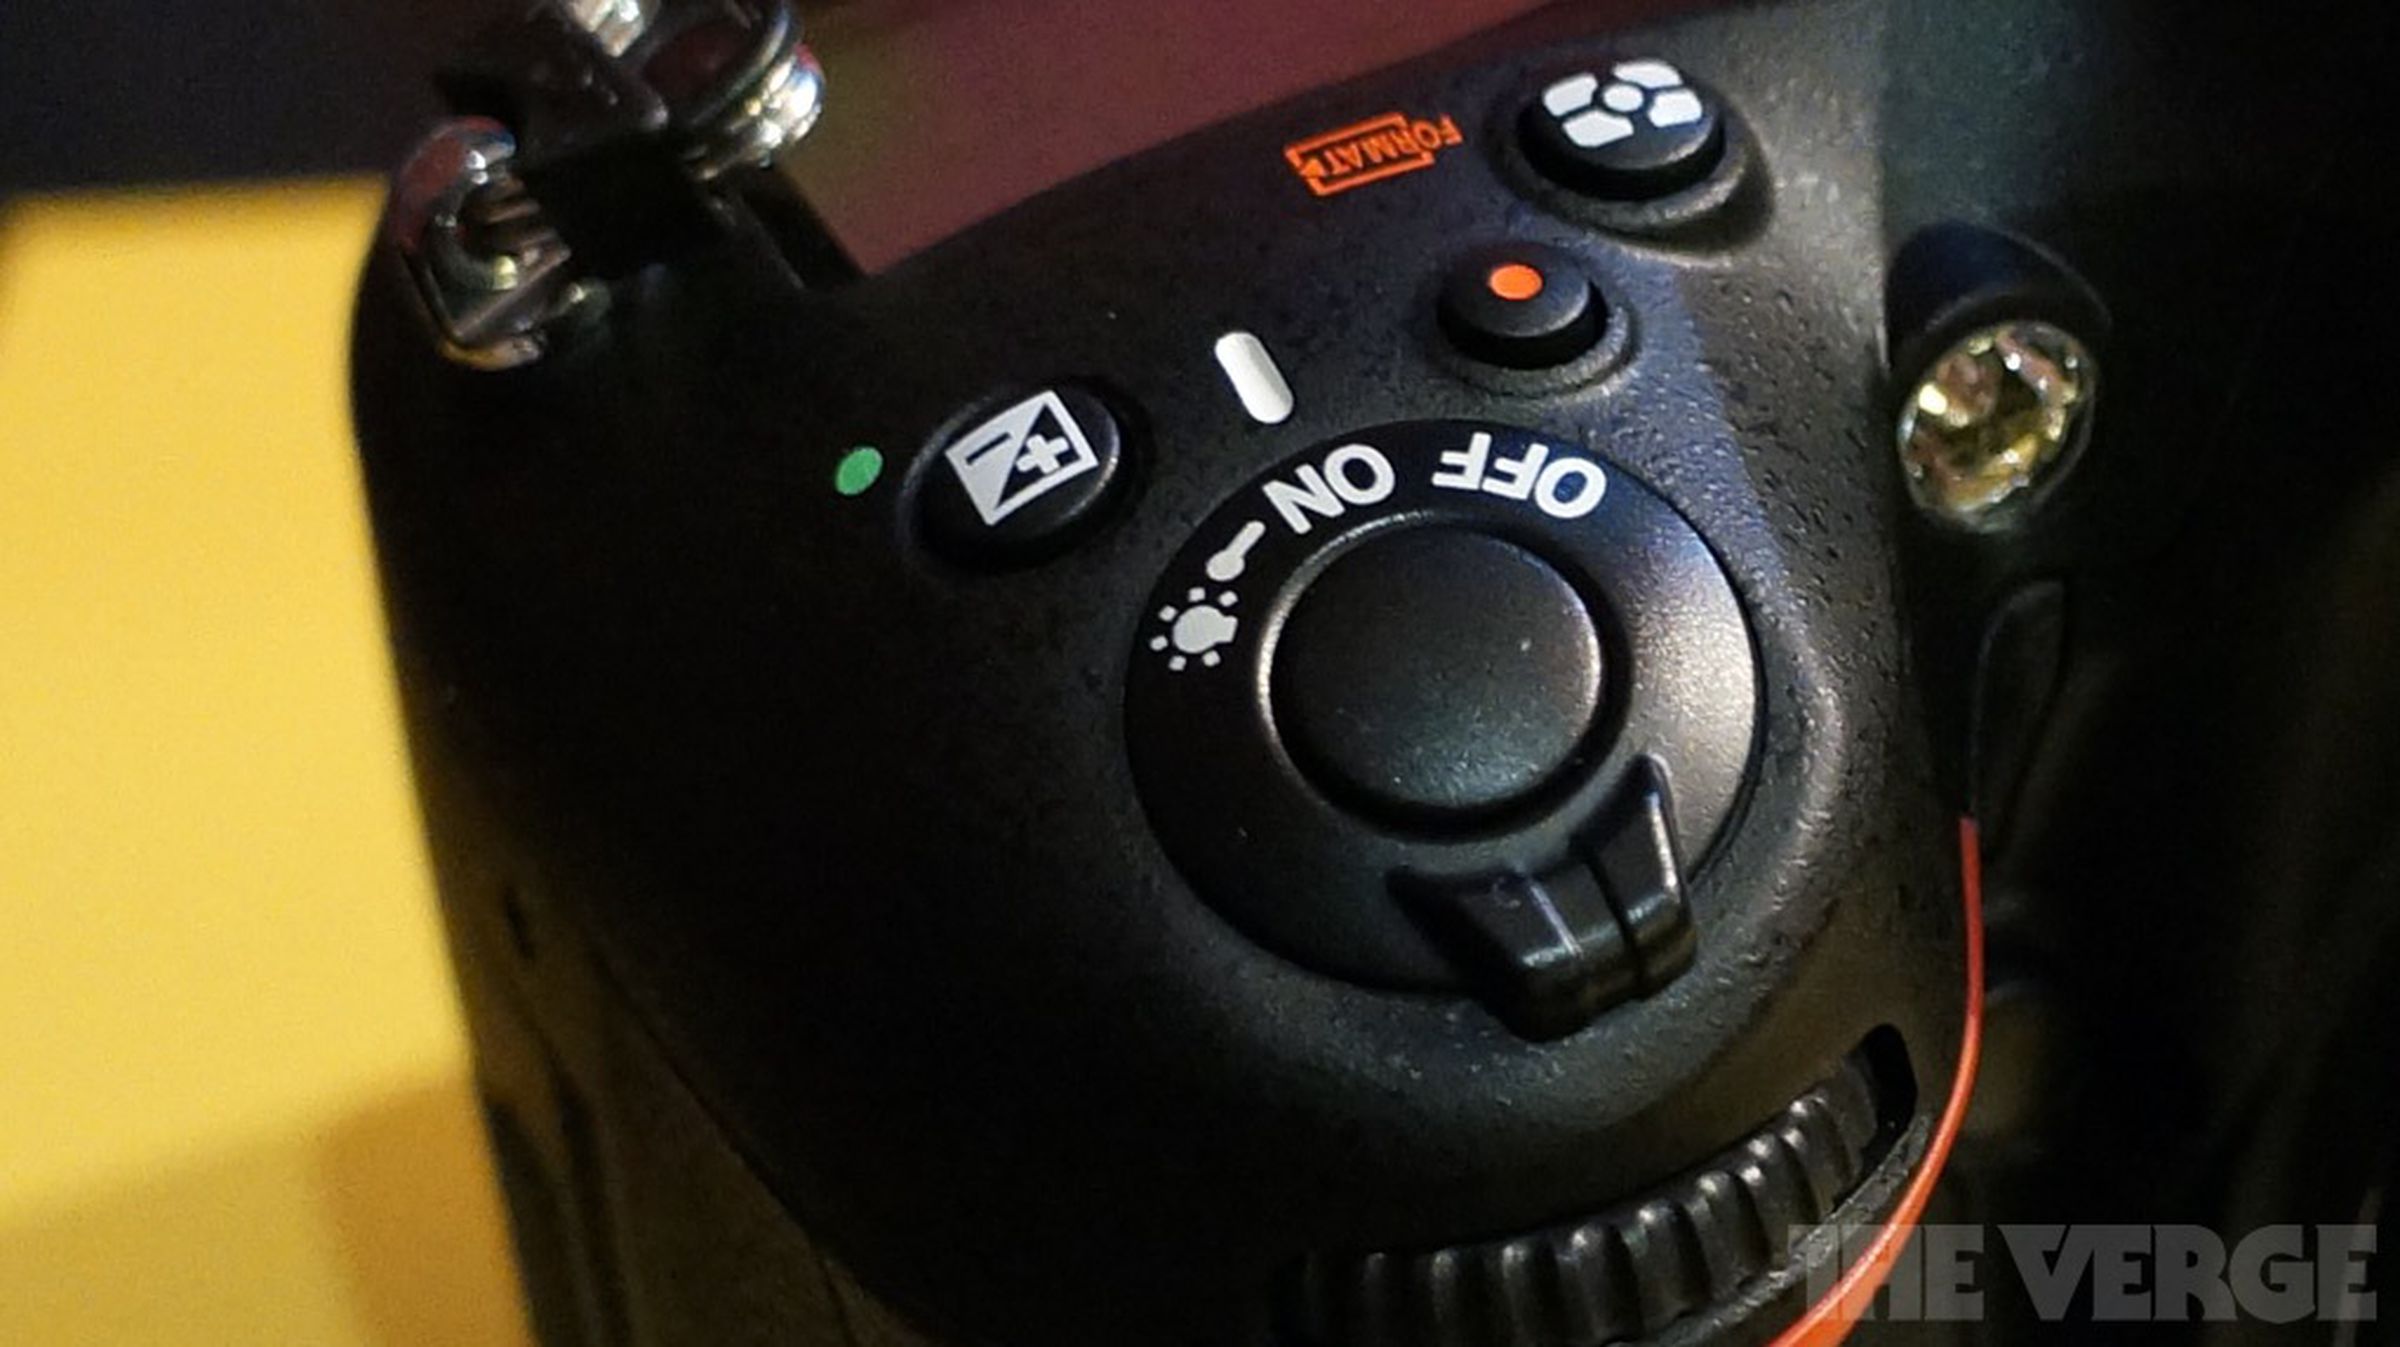 Nikon D600 hands-on pictures